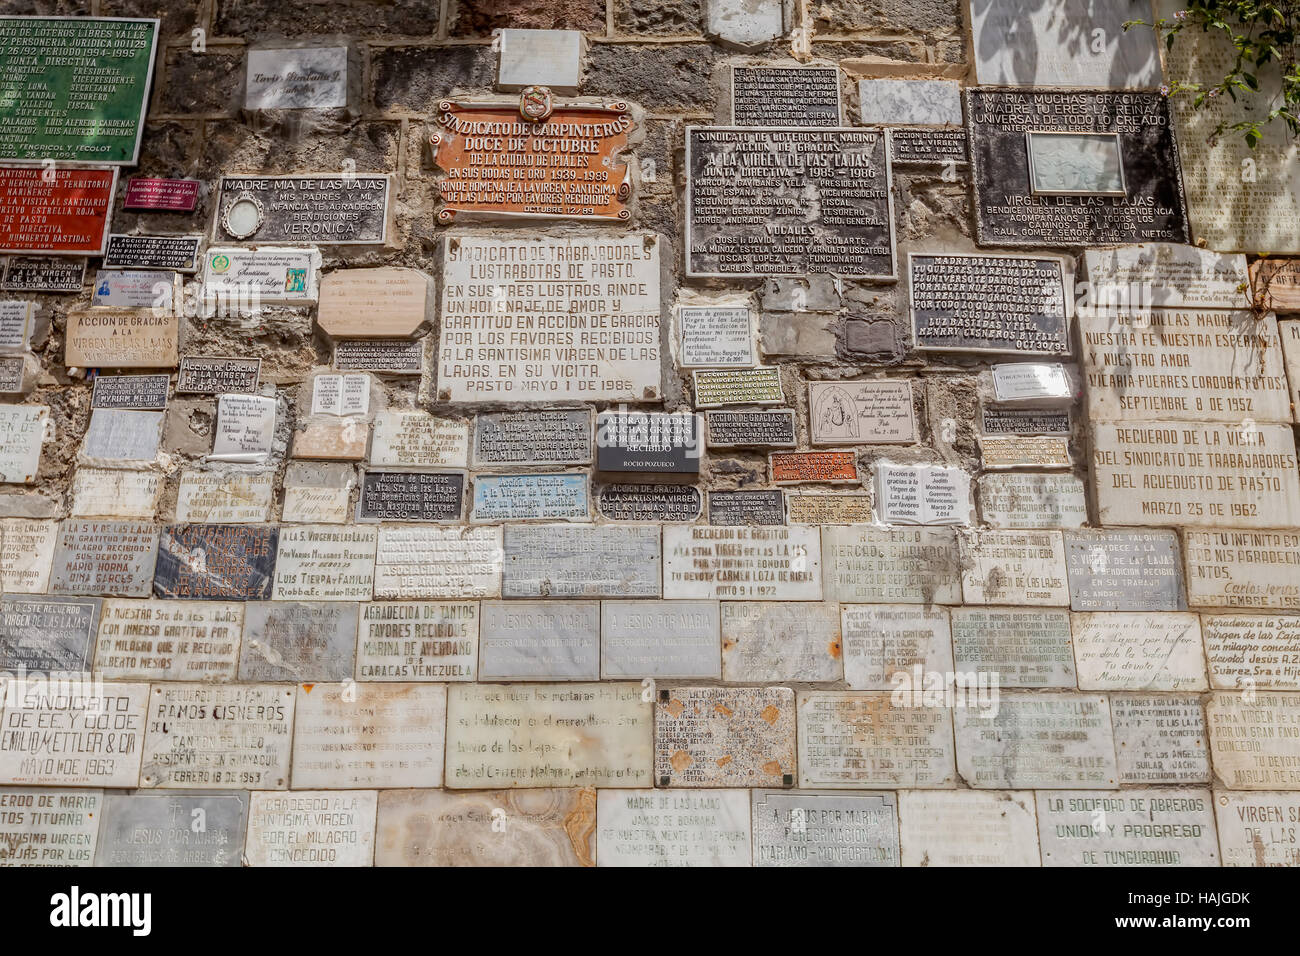 Ipiales, Ecuador - 11 September  2016: Marble Plates With The Religious Texts Of The Las Lajas Catholic Church, Built Inside The Canyon Stock Photo